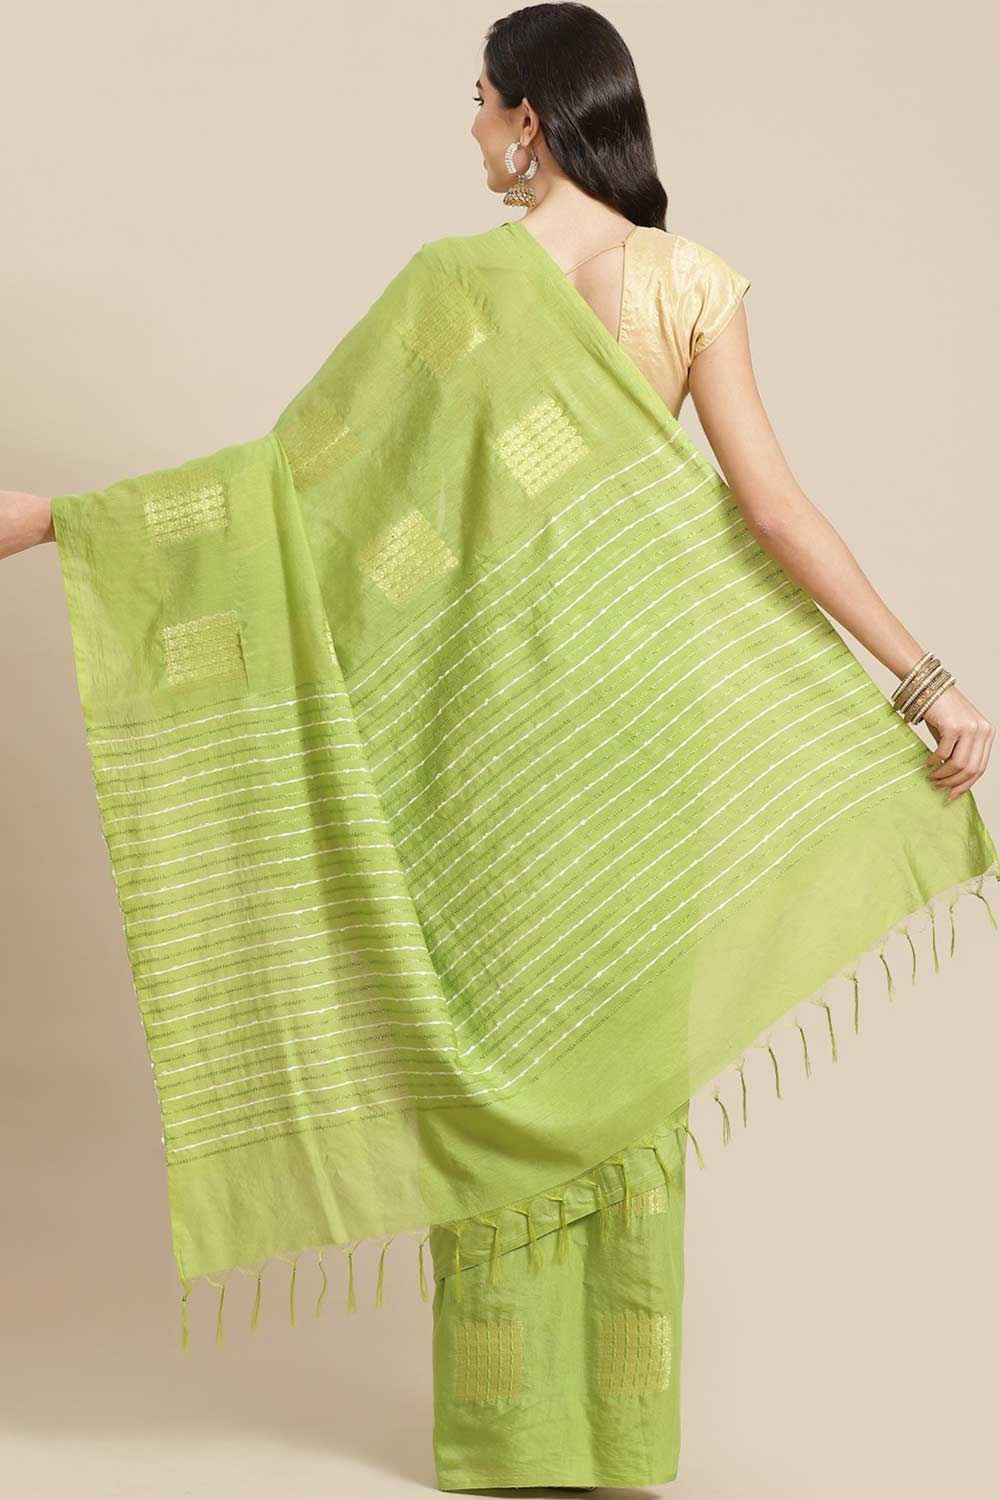 Shop Sarah Light Green Zari Woven Blended Silk One Minute Saree at best offer at our  Store - One Minute Saree